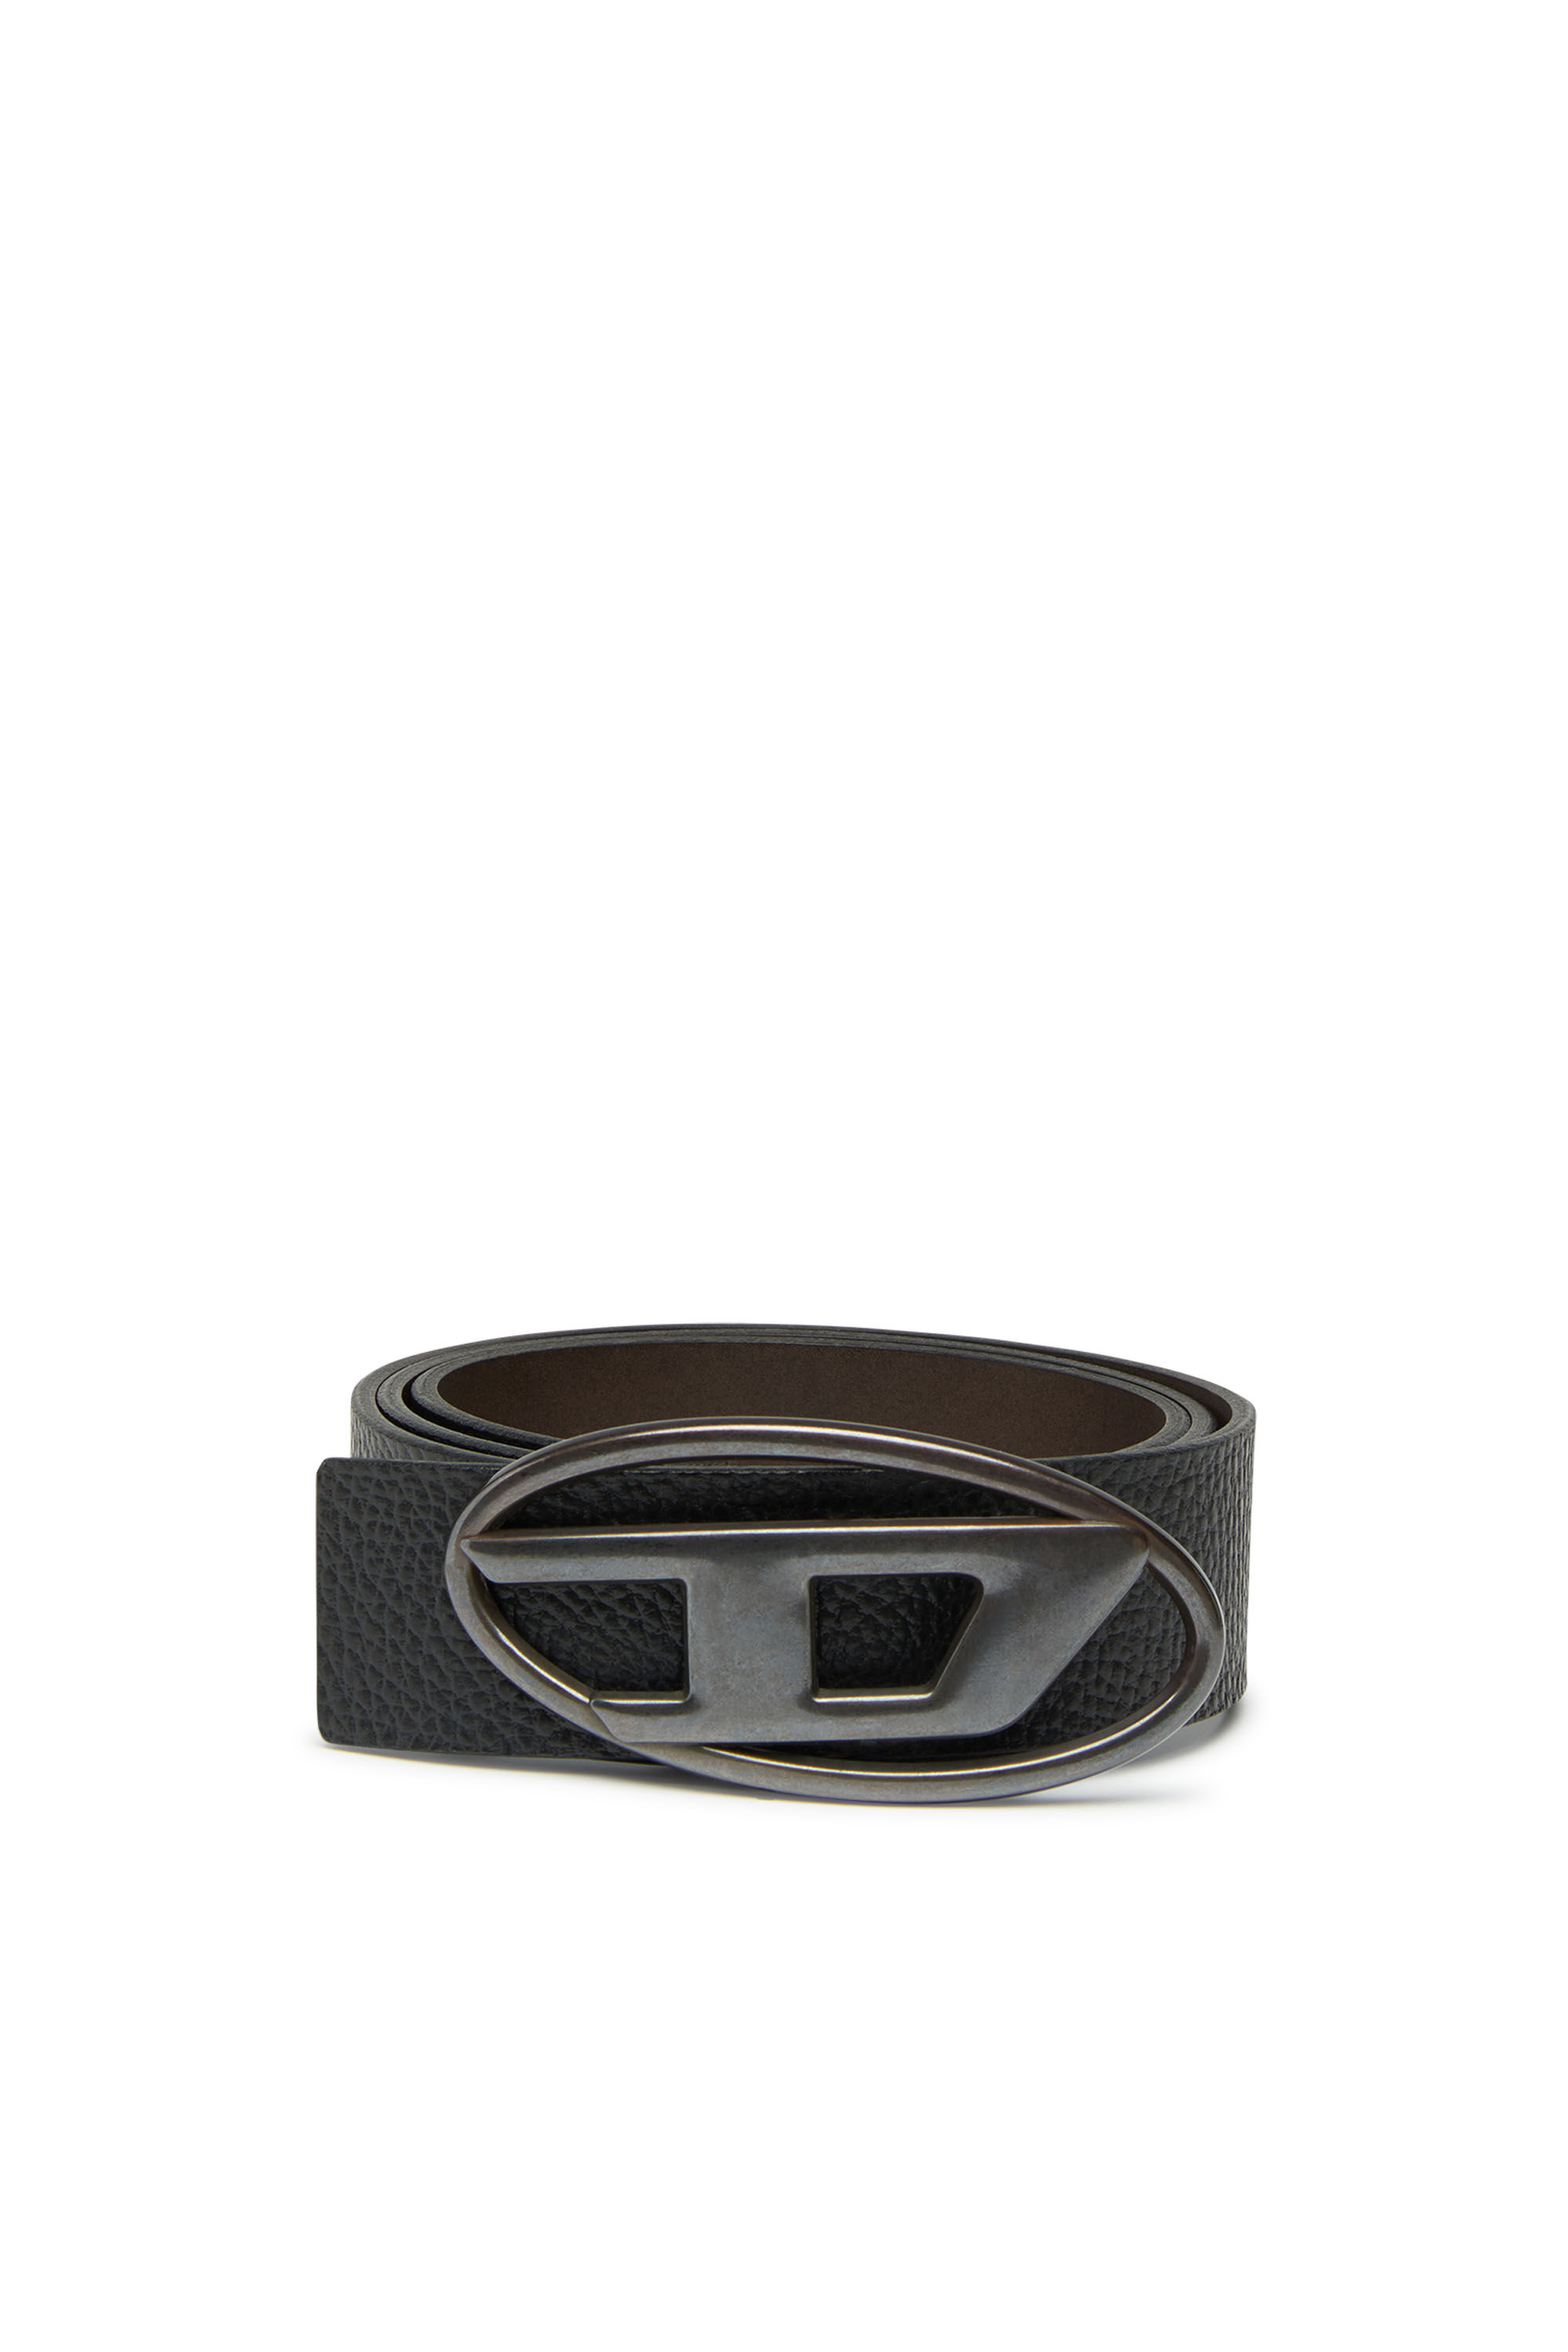 Gucci Black/Brown Leather Gucci Reversible Buckle Belt Size 90/36